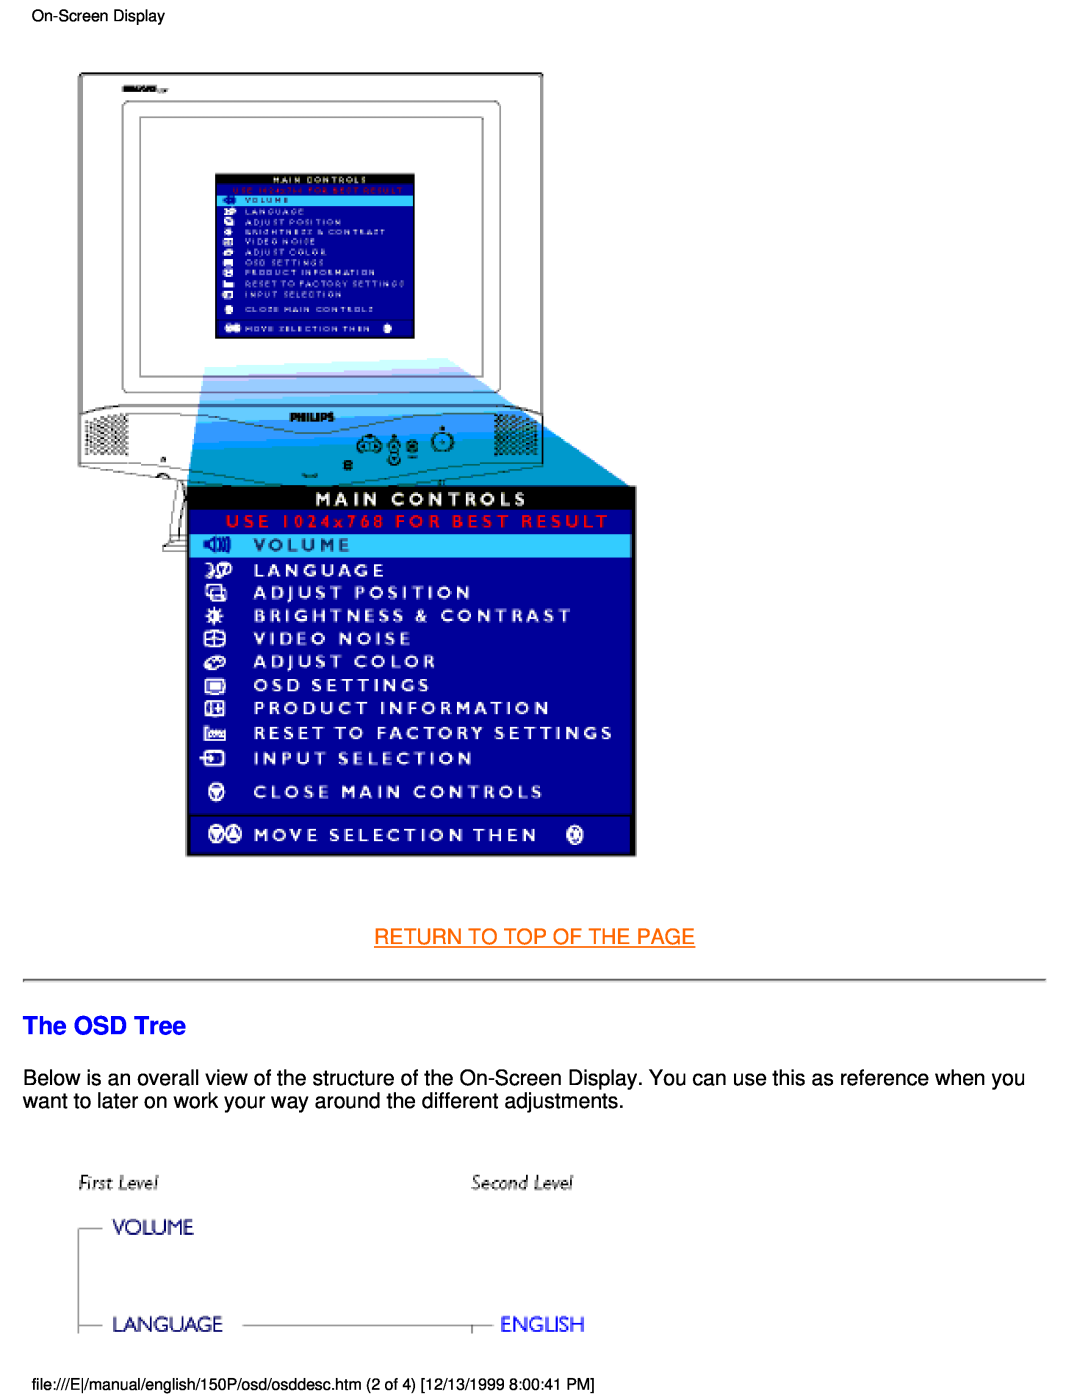 Philips 150P user manual The OSD Tree, Return To Top Of The Page, On-Screen Display 